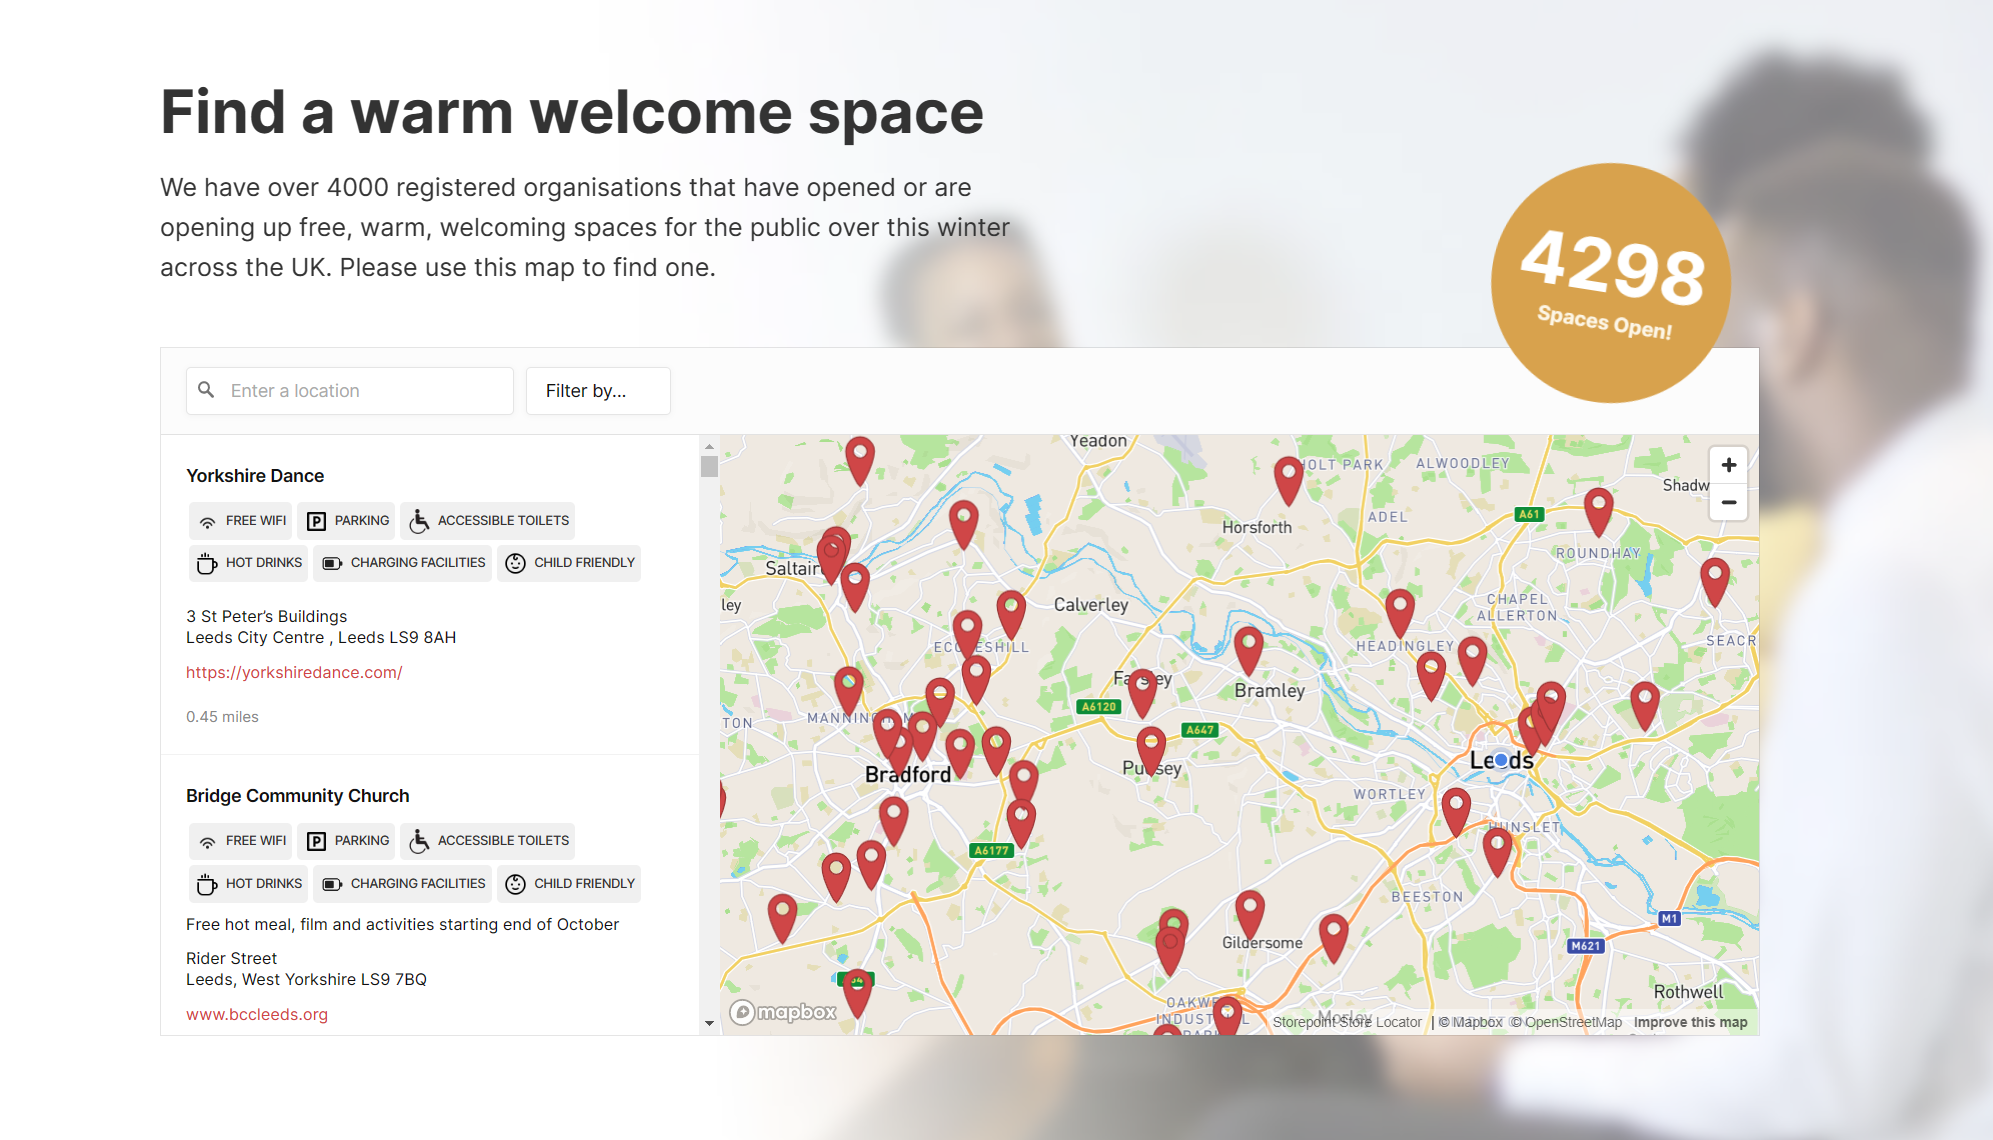 Find a Warm Welcome Space during the cost-of-living crisis using their helpful map: https://www.warmwelcome.uk/#find-a-space